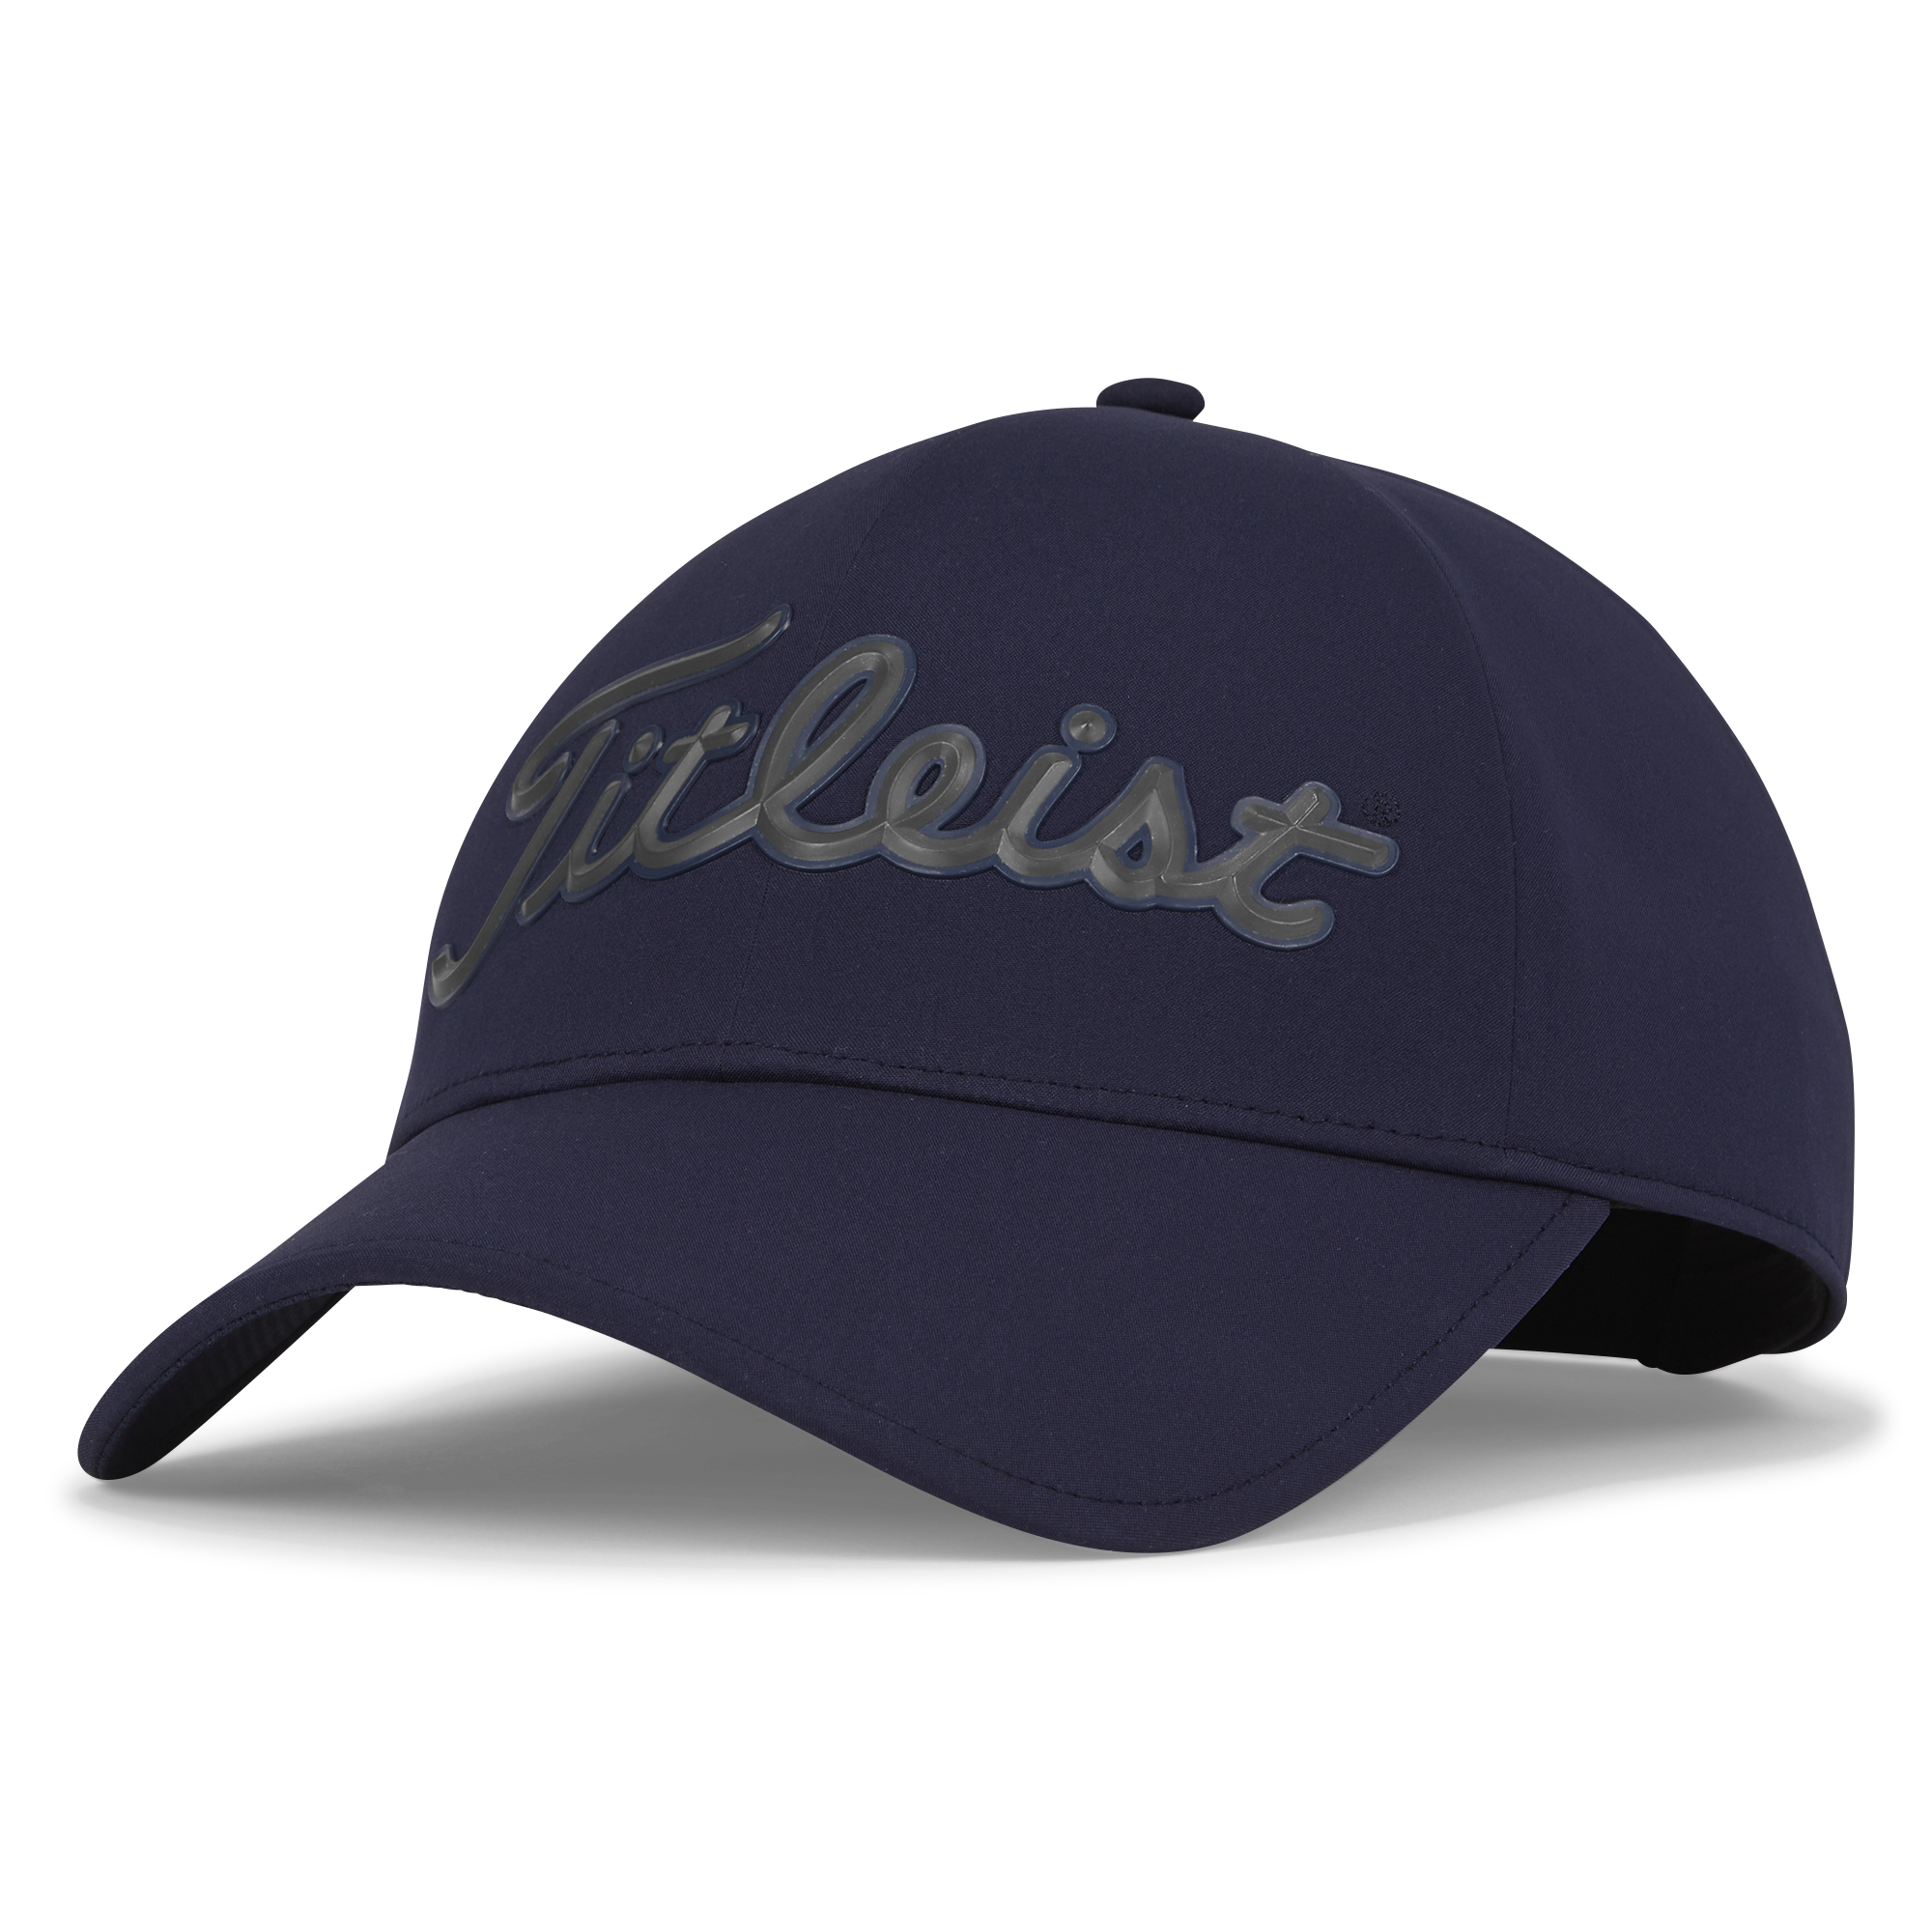 Titleist Official Players StaDry in Navy/Charcoal